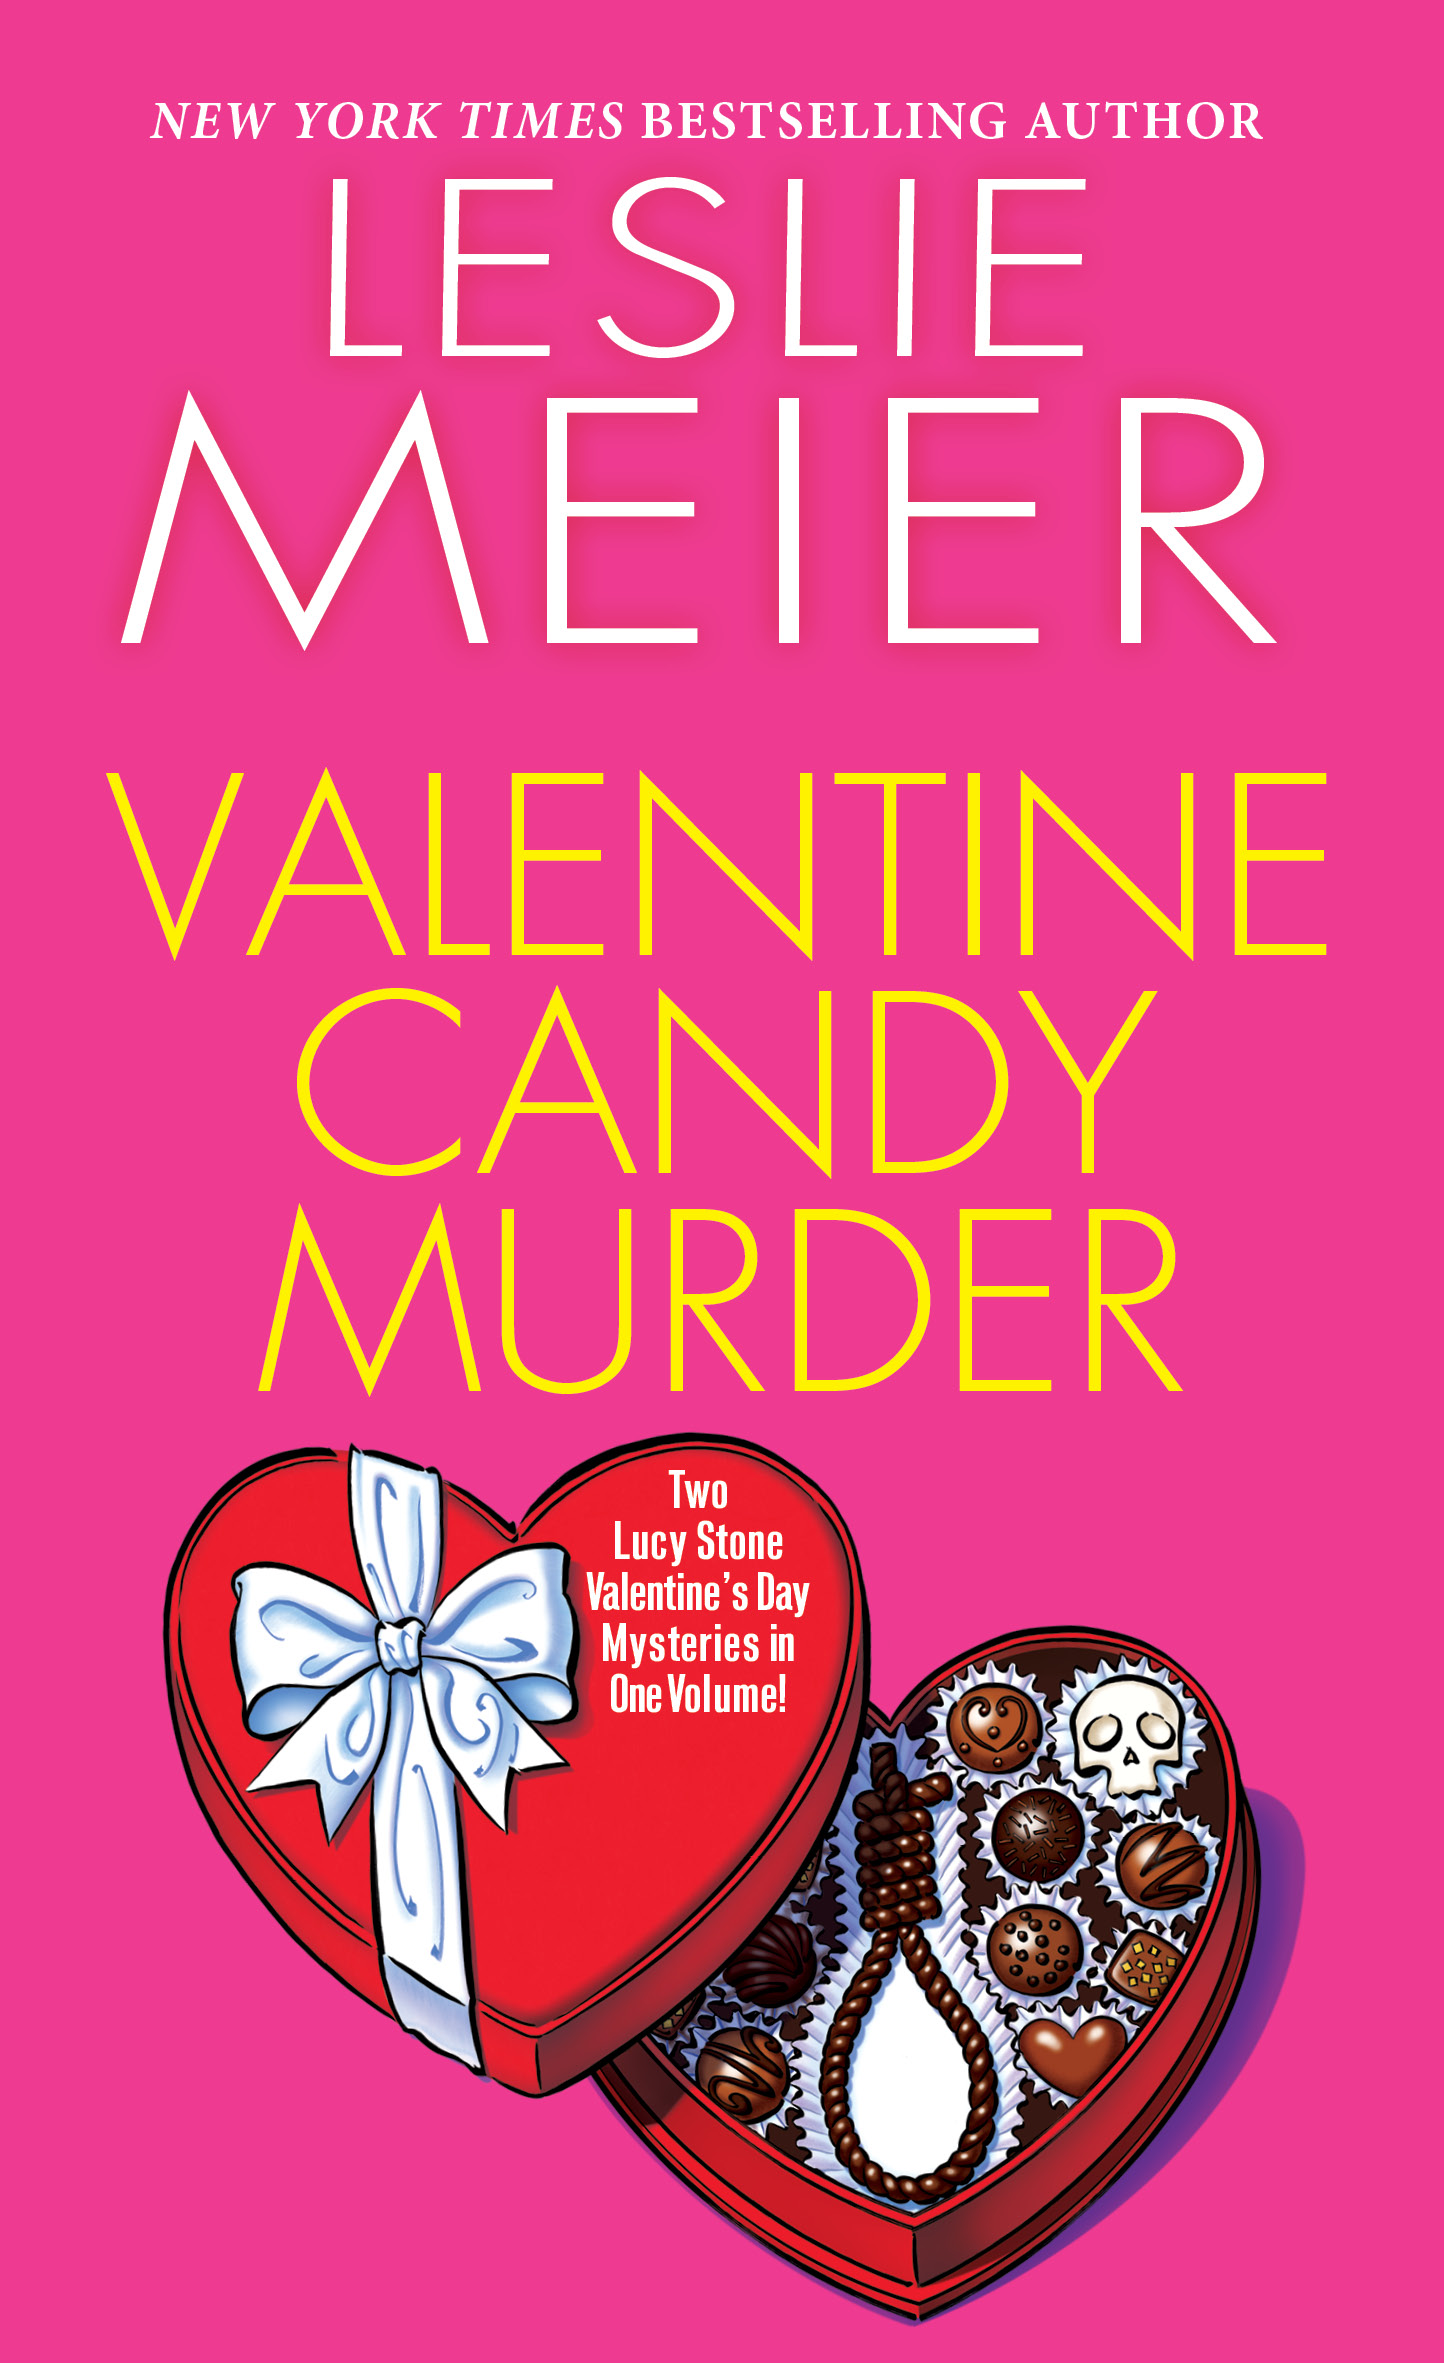 Valentine candy murder cover image